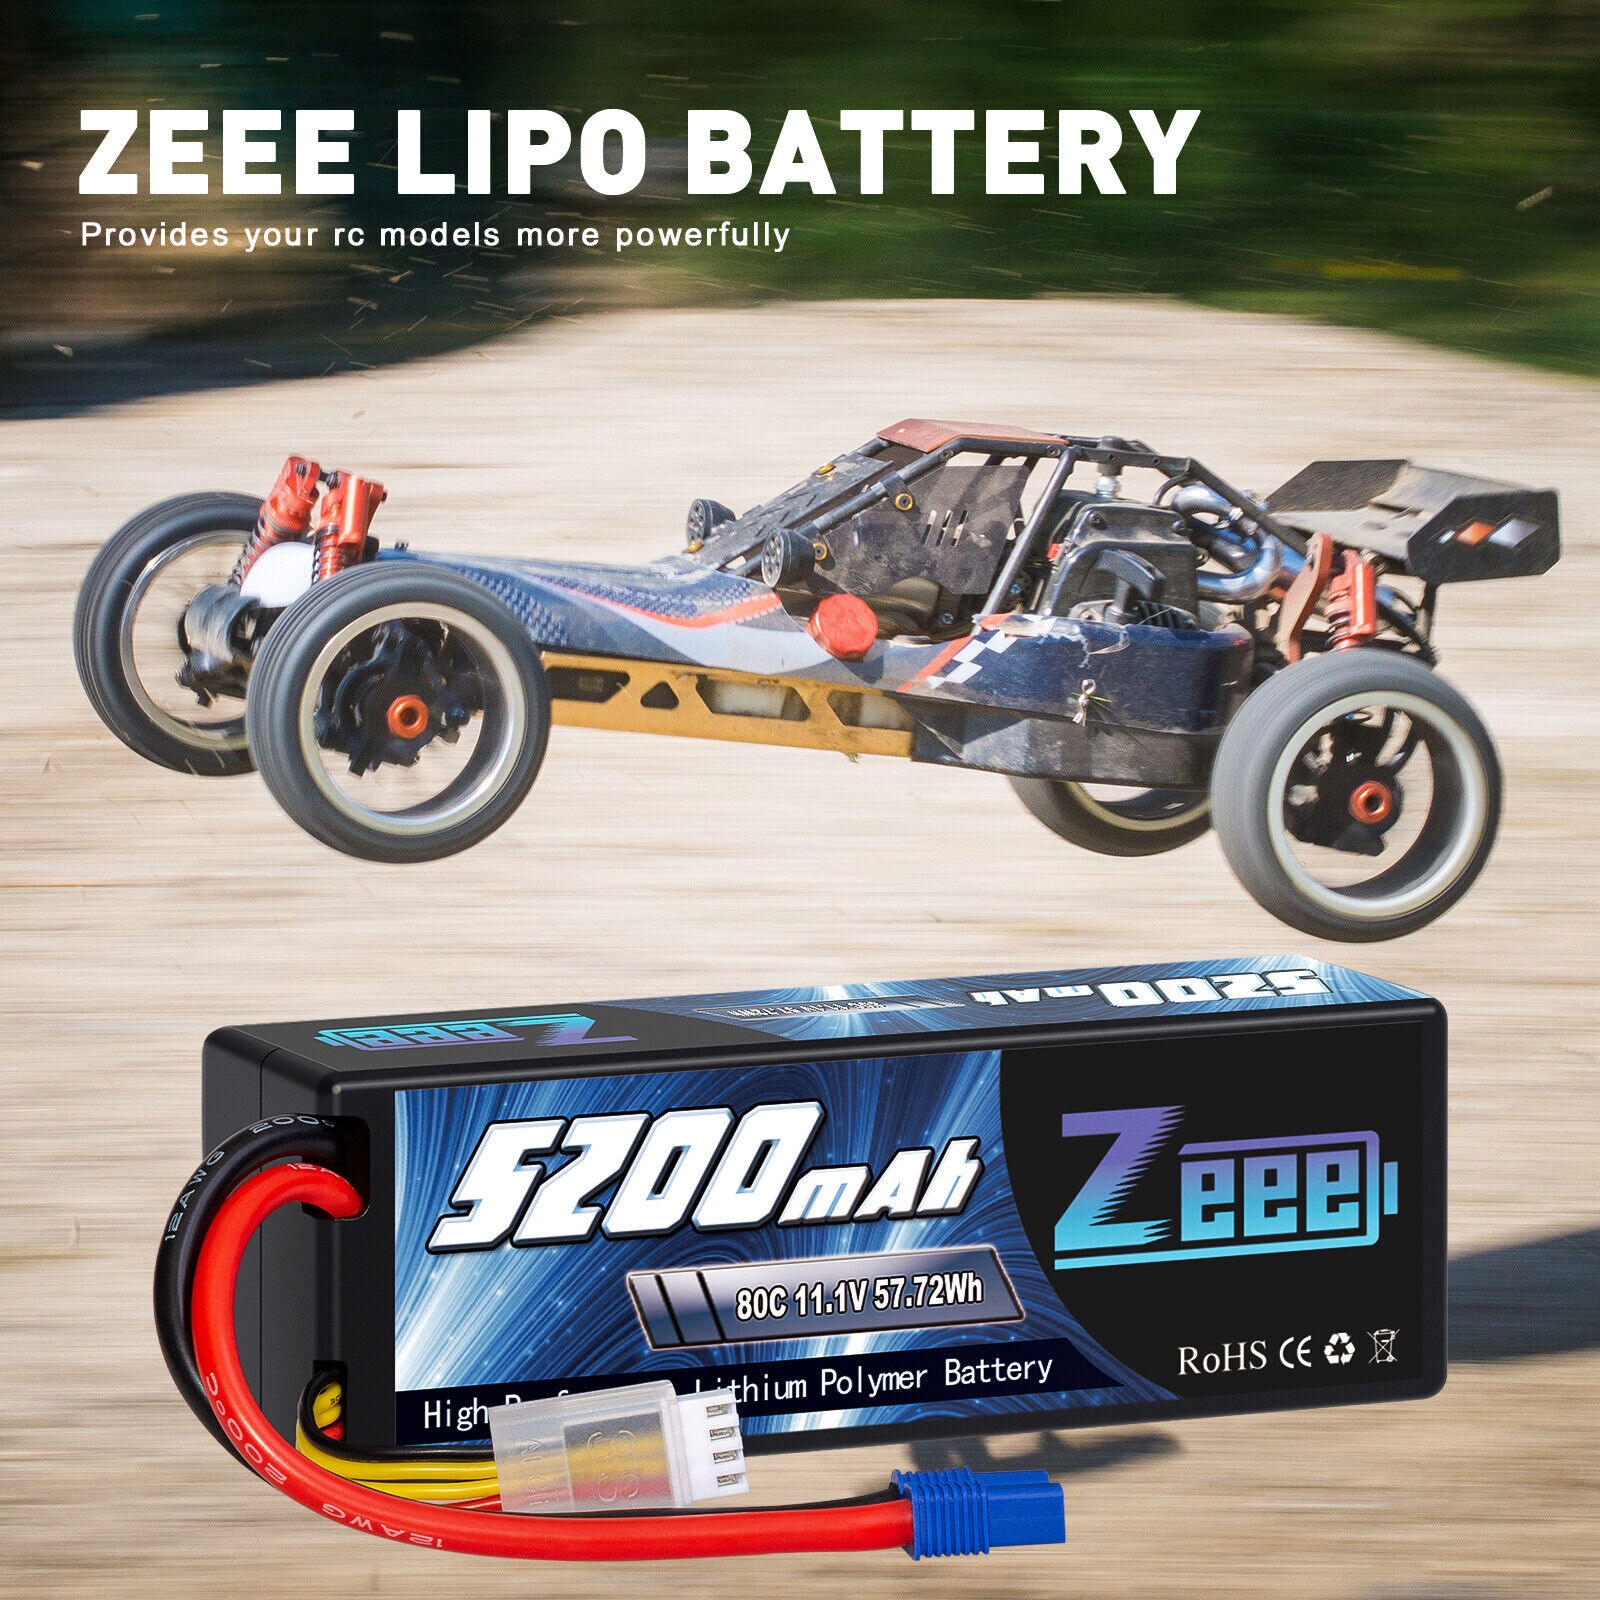 2x Zeee 11.1V 80C 5200mAh EC3 3S LiPo Battery for RC Car Truck Helicopter Buggy ZEEE Does Not Apply - фотография #8